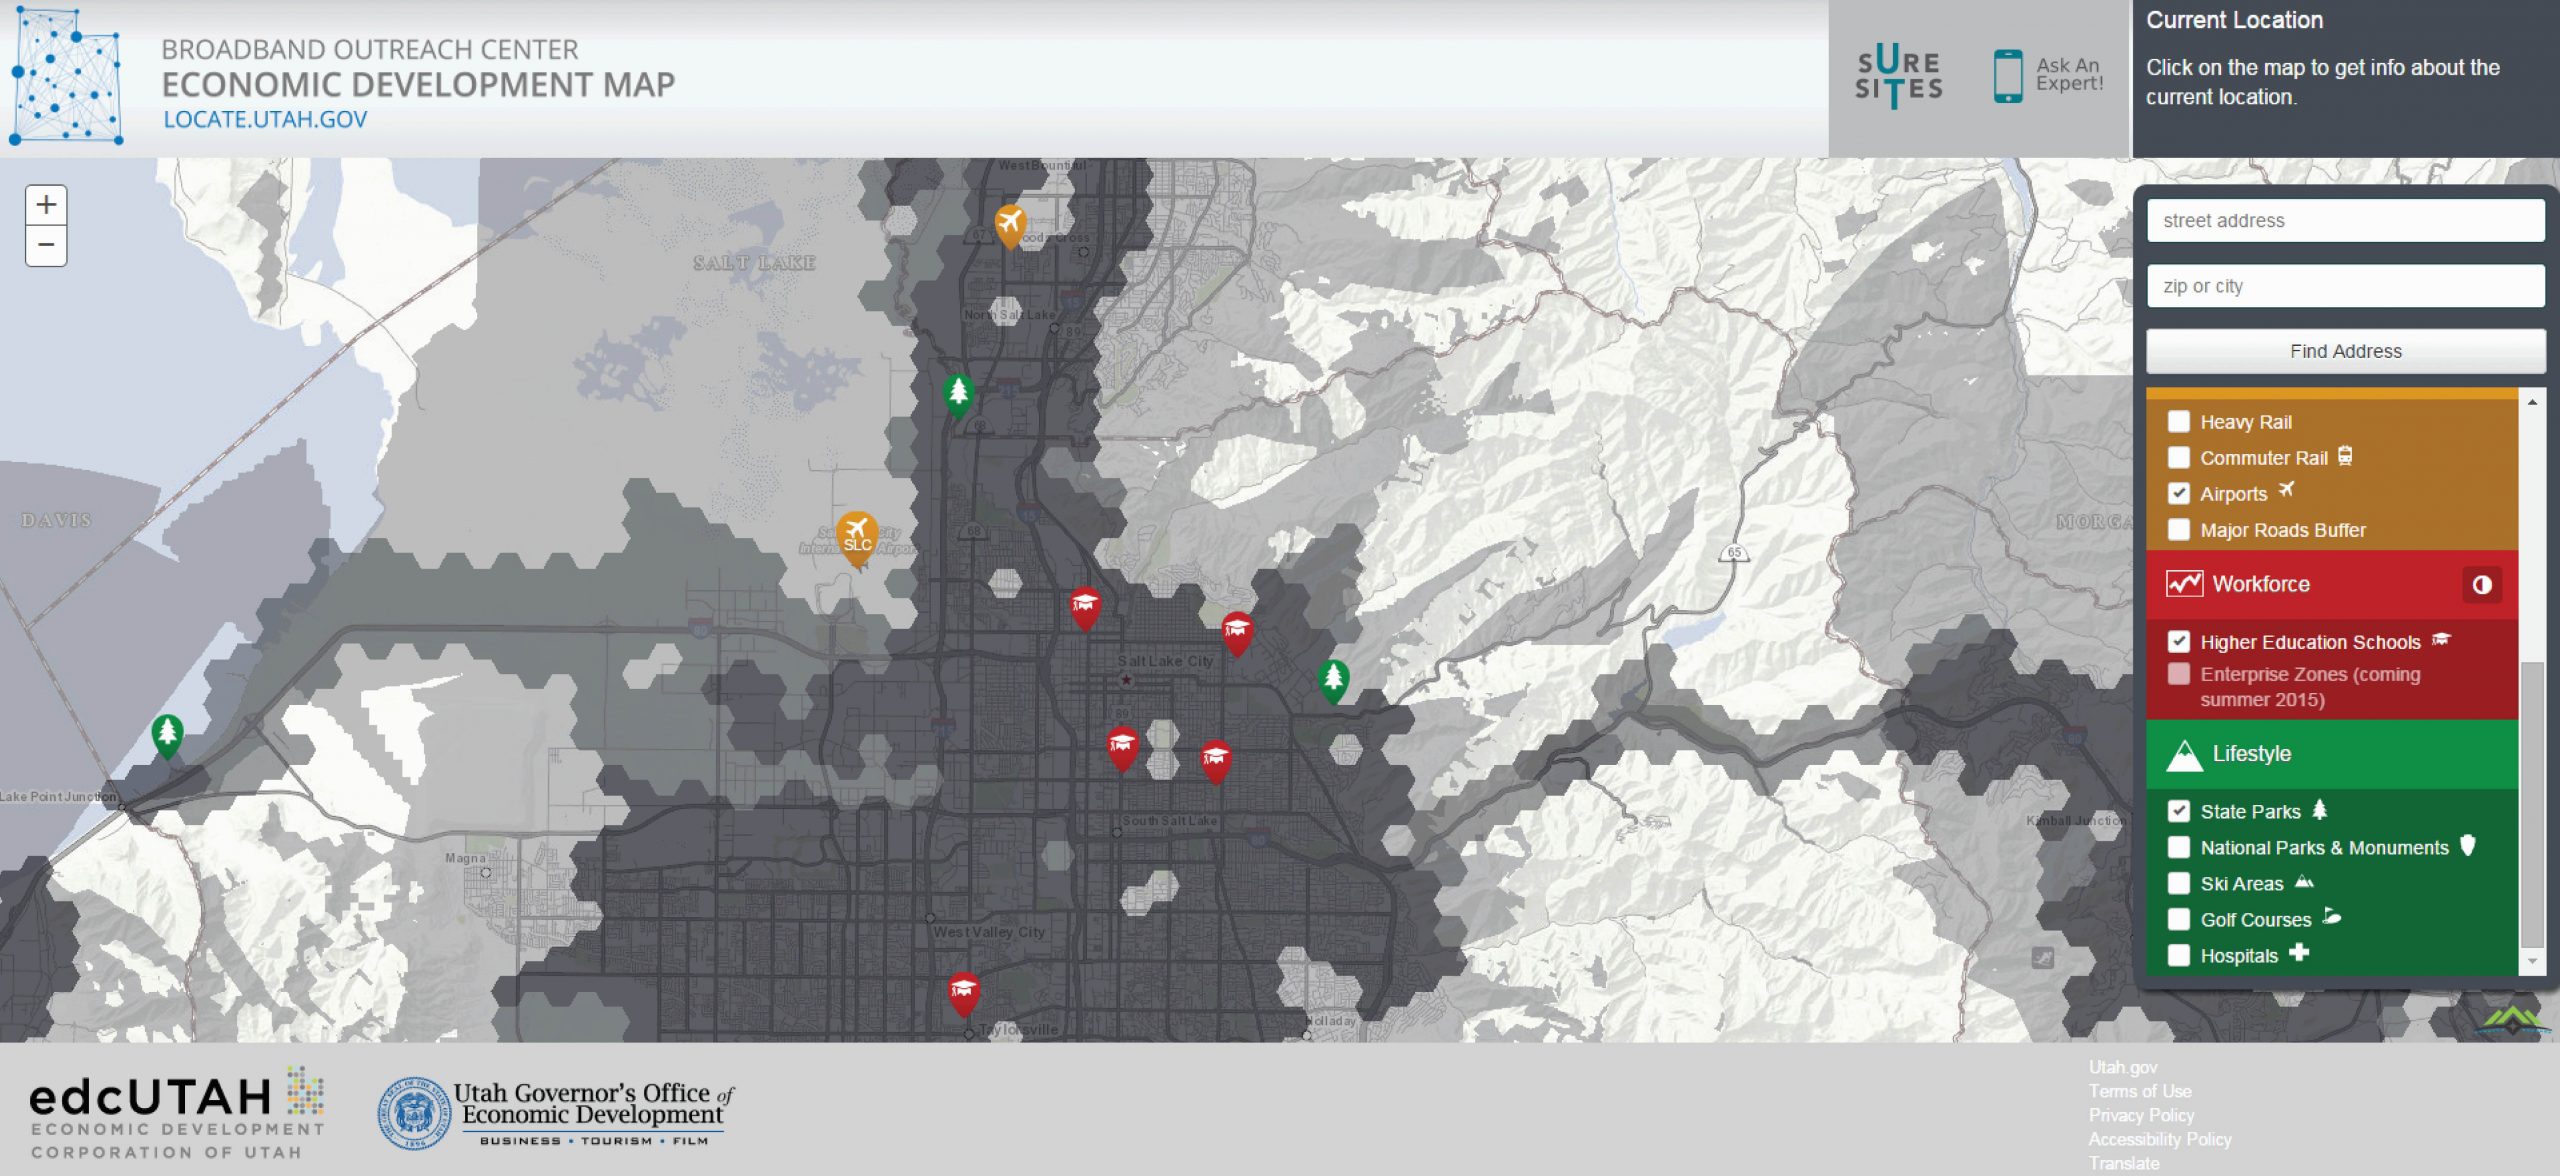 Featured image for “Locate.utah.gov Launch Generates Local and National Press”